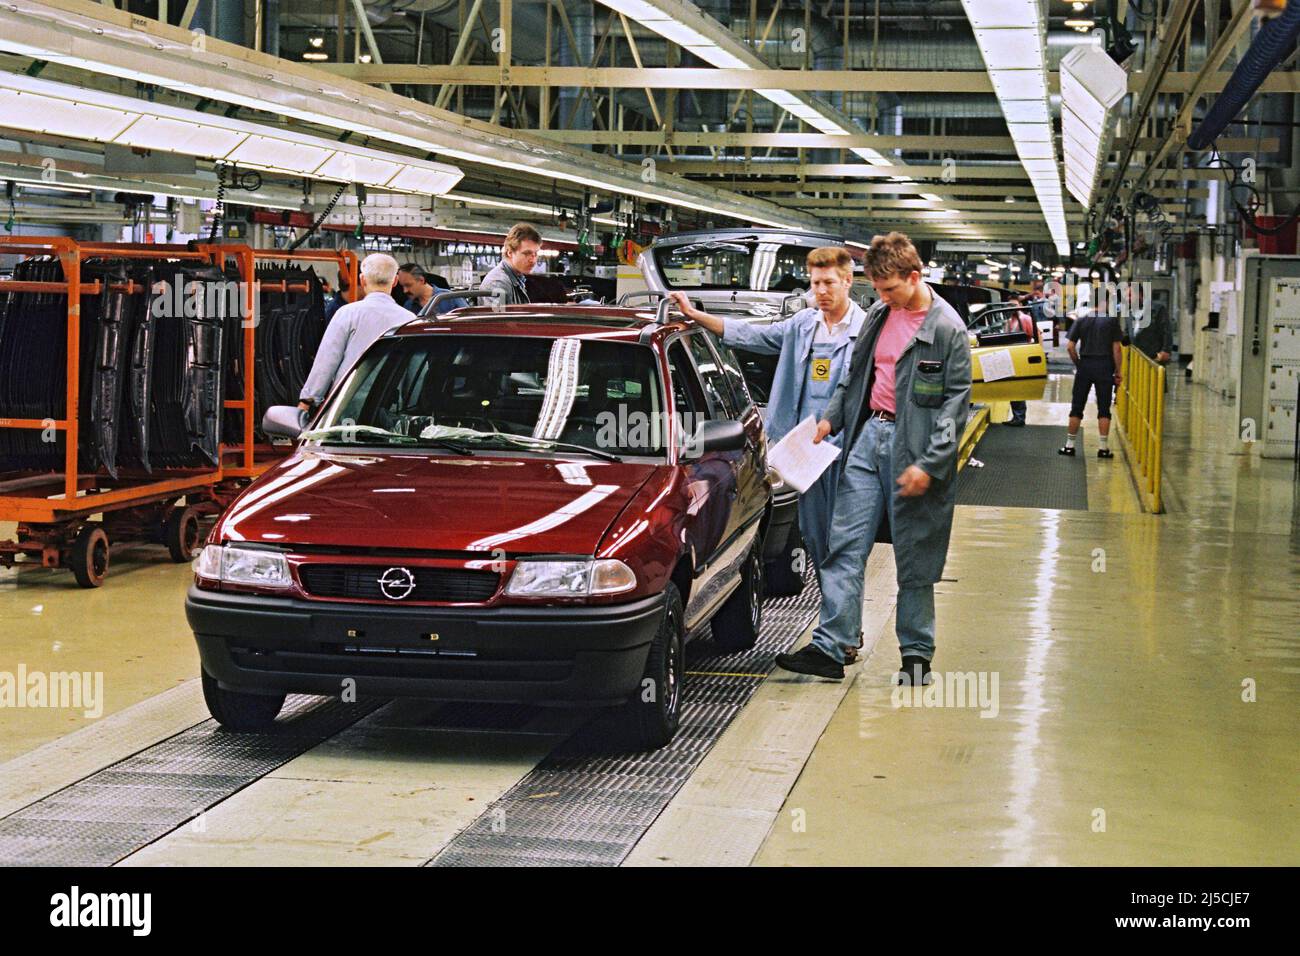 Bochum, DEU, 04/10/1995 - Production of the Opel Astra at the Opel plant in Bochum. 13.7 million cars were built at Opel in Bochum in 52 years - until 2014. For ten years, the workforce had fought against the end. [automated translation] Stock Photo